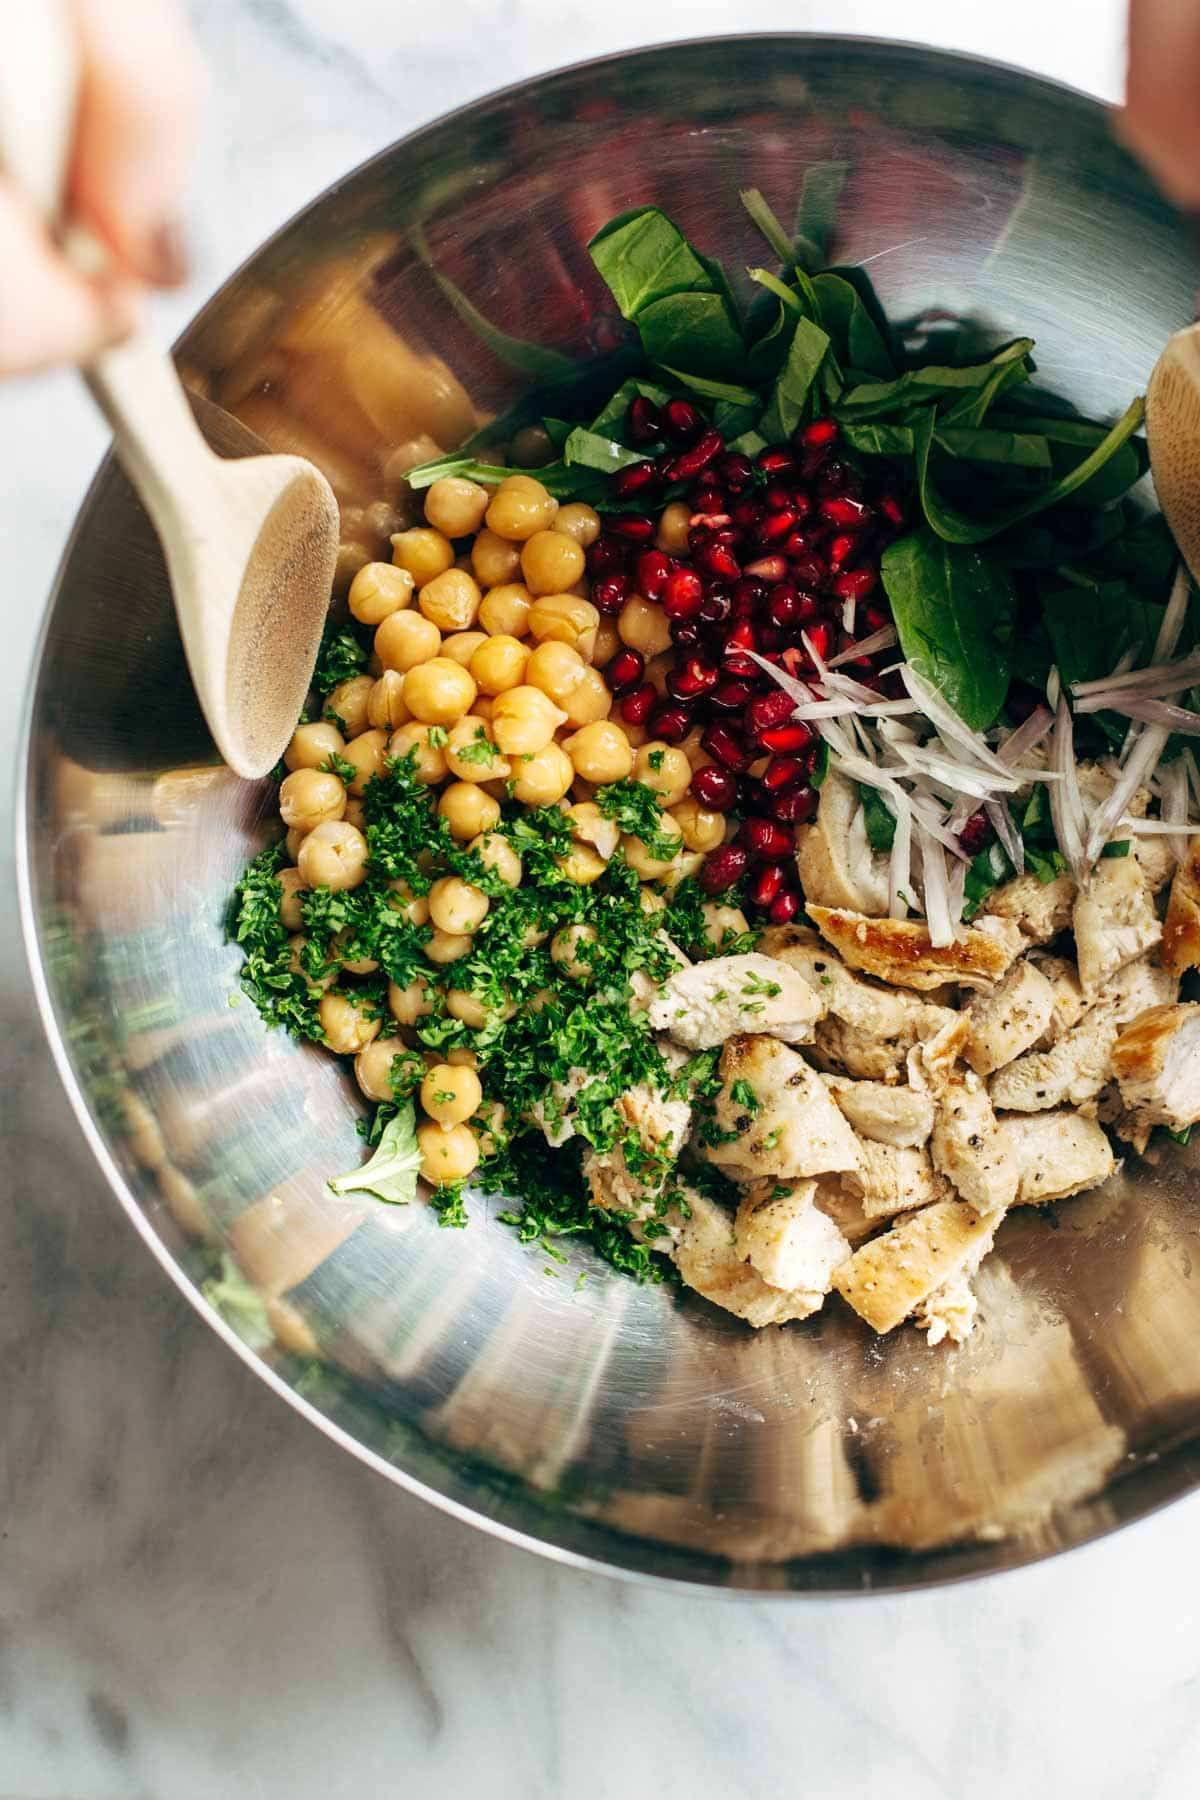 Winter Spa Salad with Lemon Chicken! Loaded with chickpeas, spinach, pomegranates, Cara Cara oranges, avocado, shallots, herbs, dressing, and lemon chicken. | pinchofyum.com